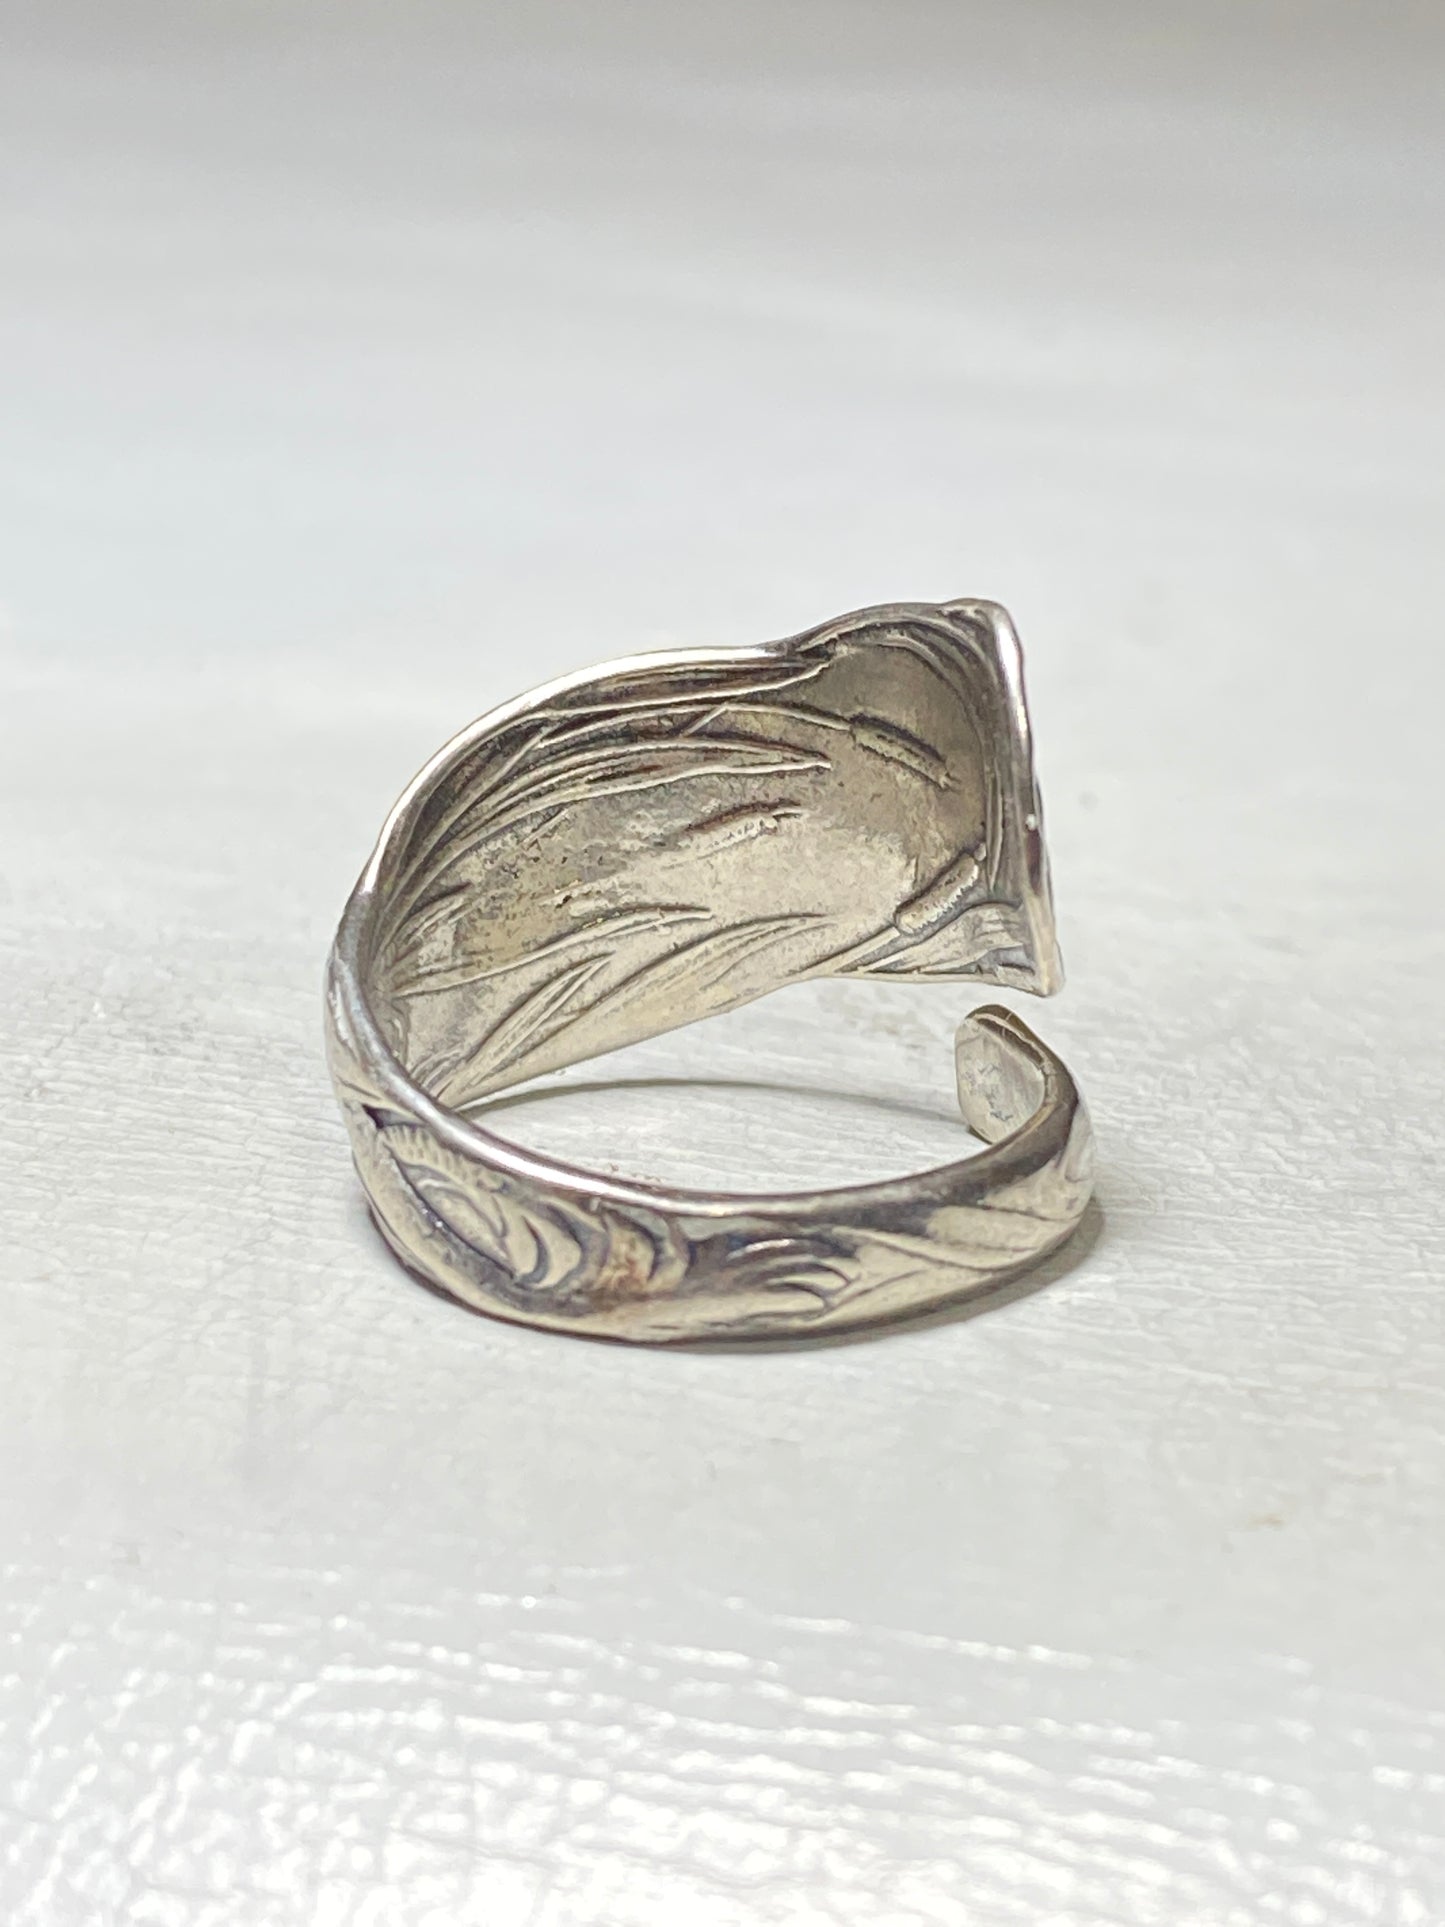 Spoon mermaid ring naked lady Marsh Plant band Shell sterling silver